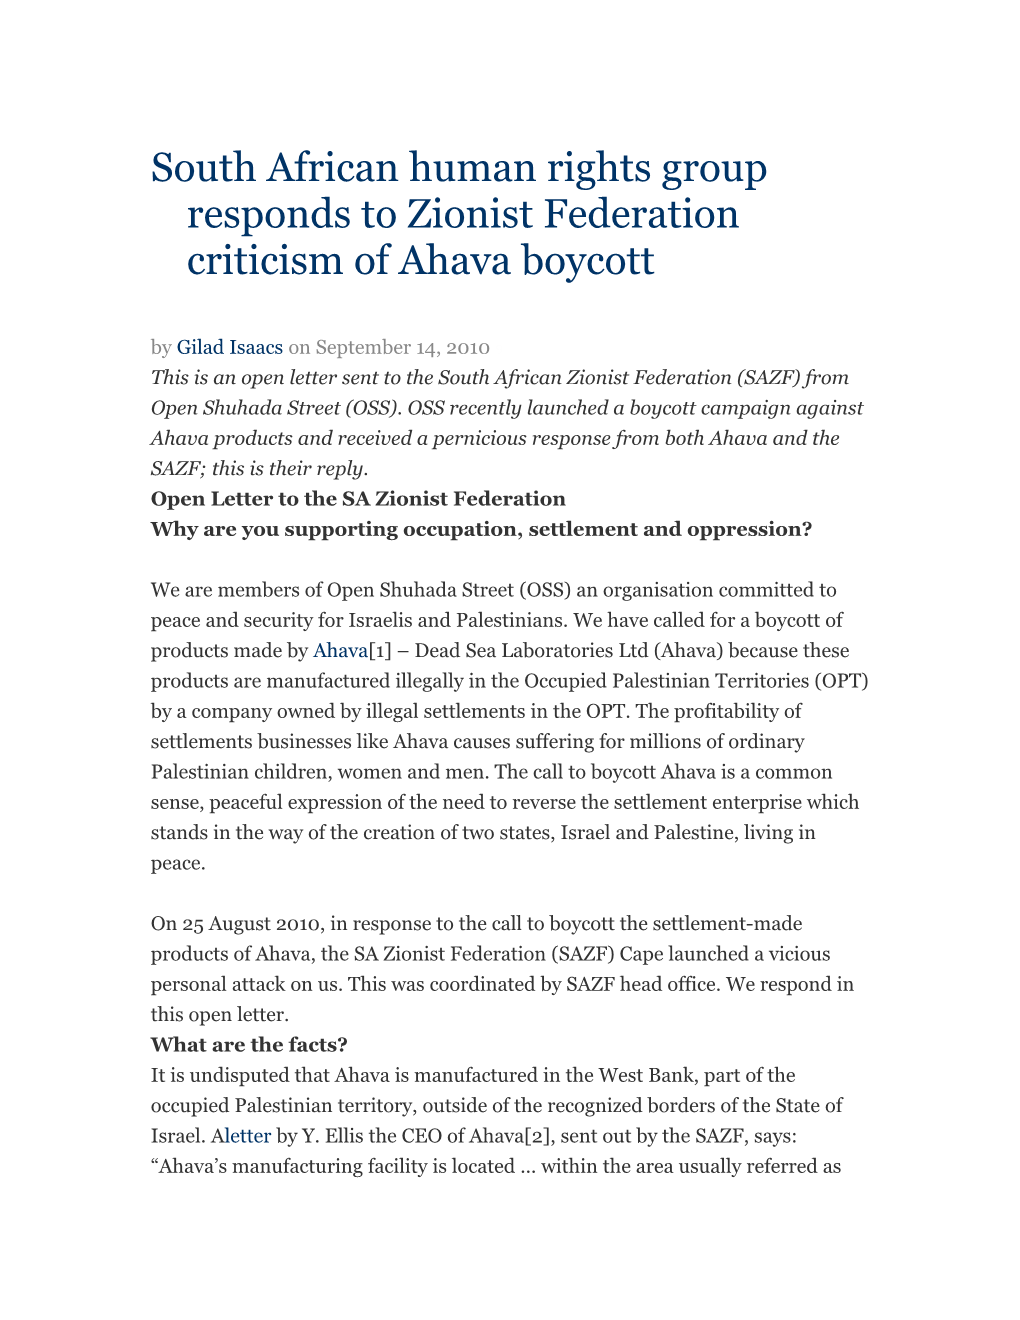 South African Human Rights Group Responds to Zionist Federation Criticism of Ahava Boycott